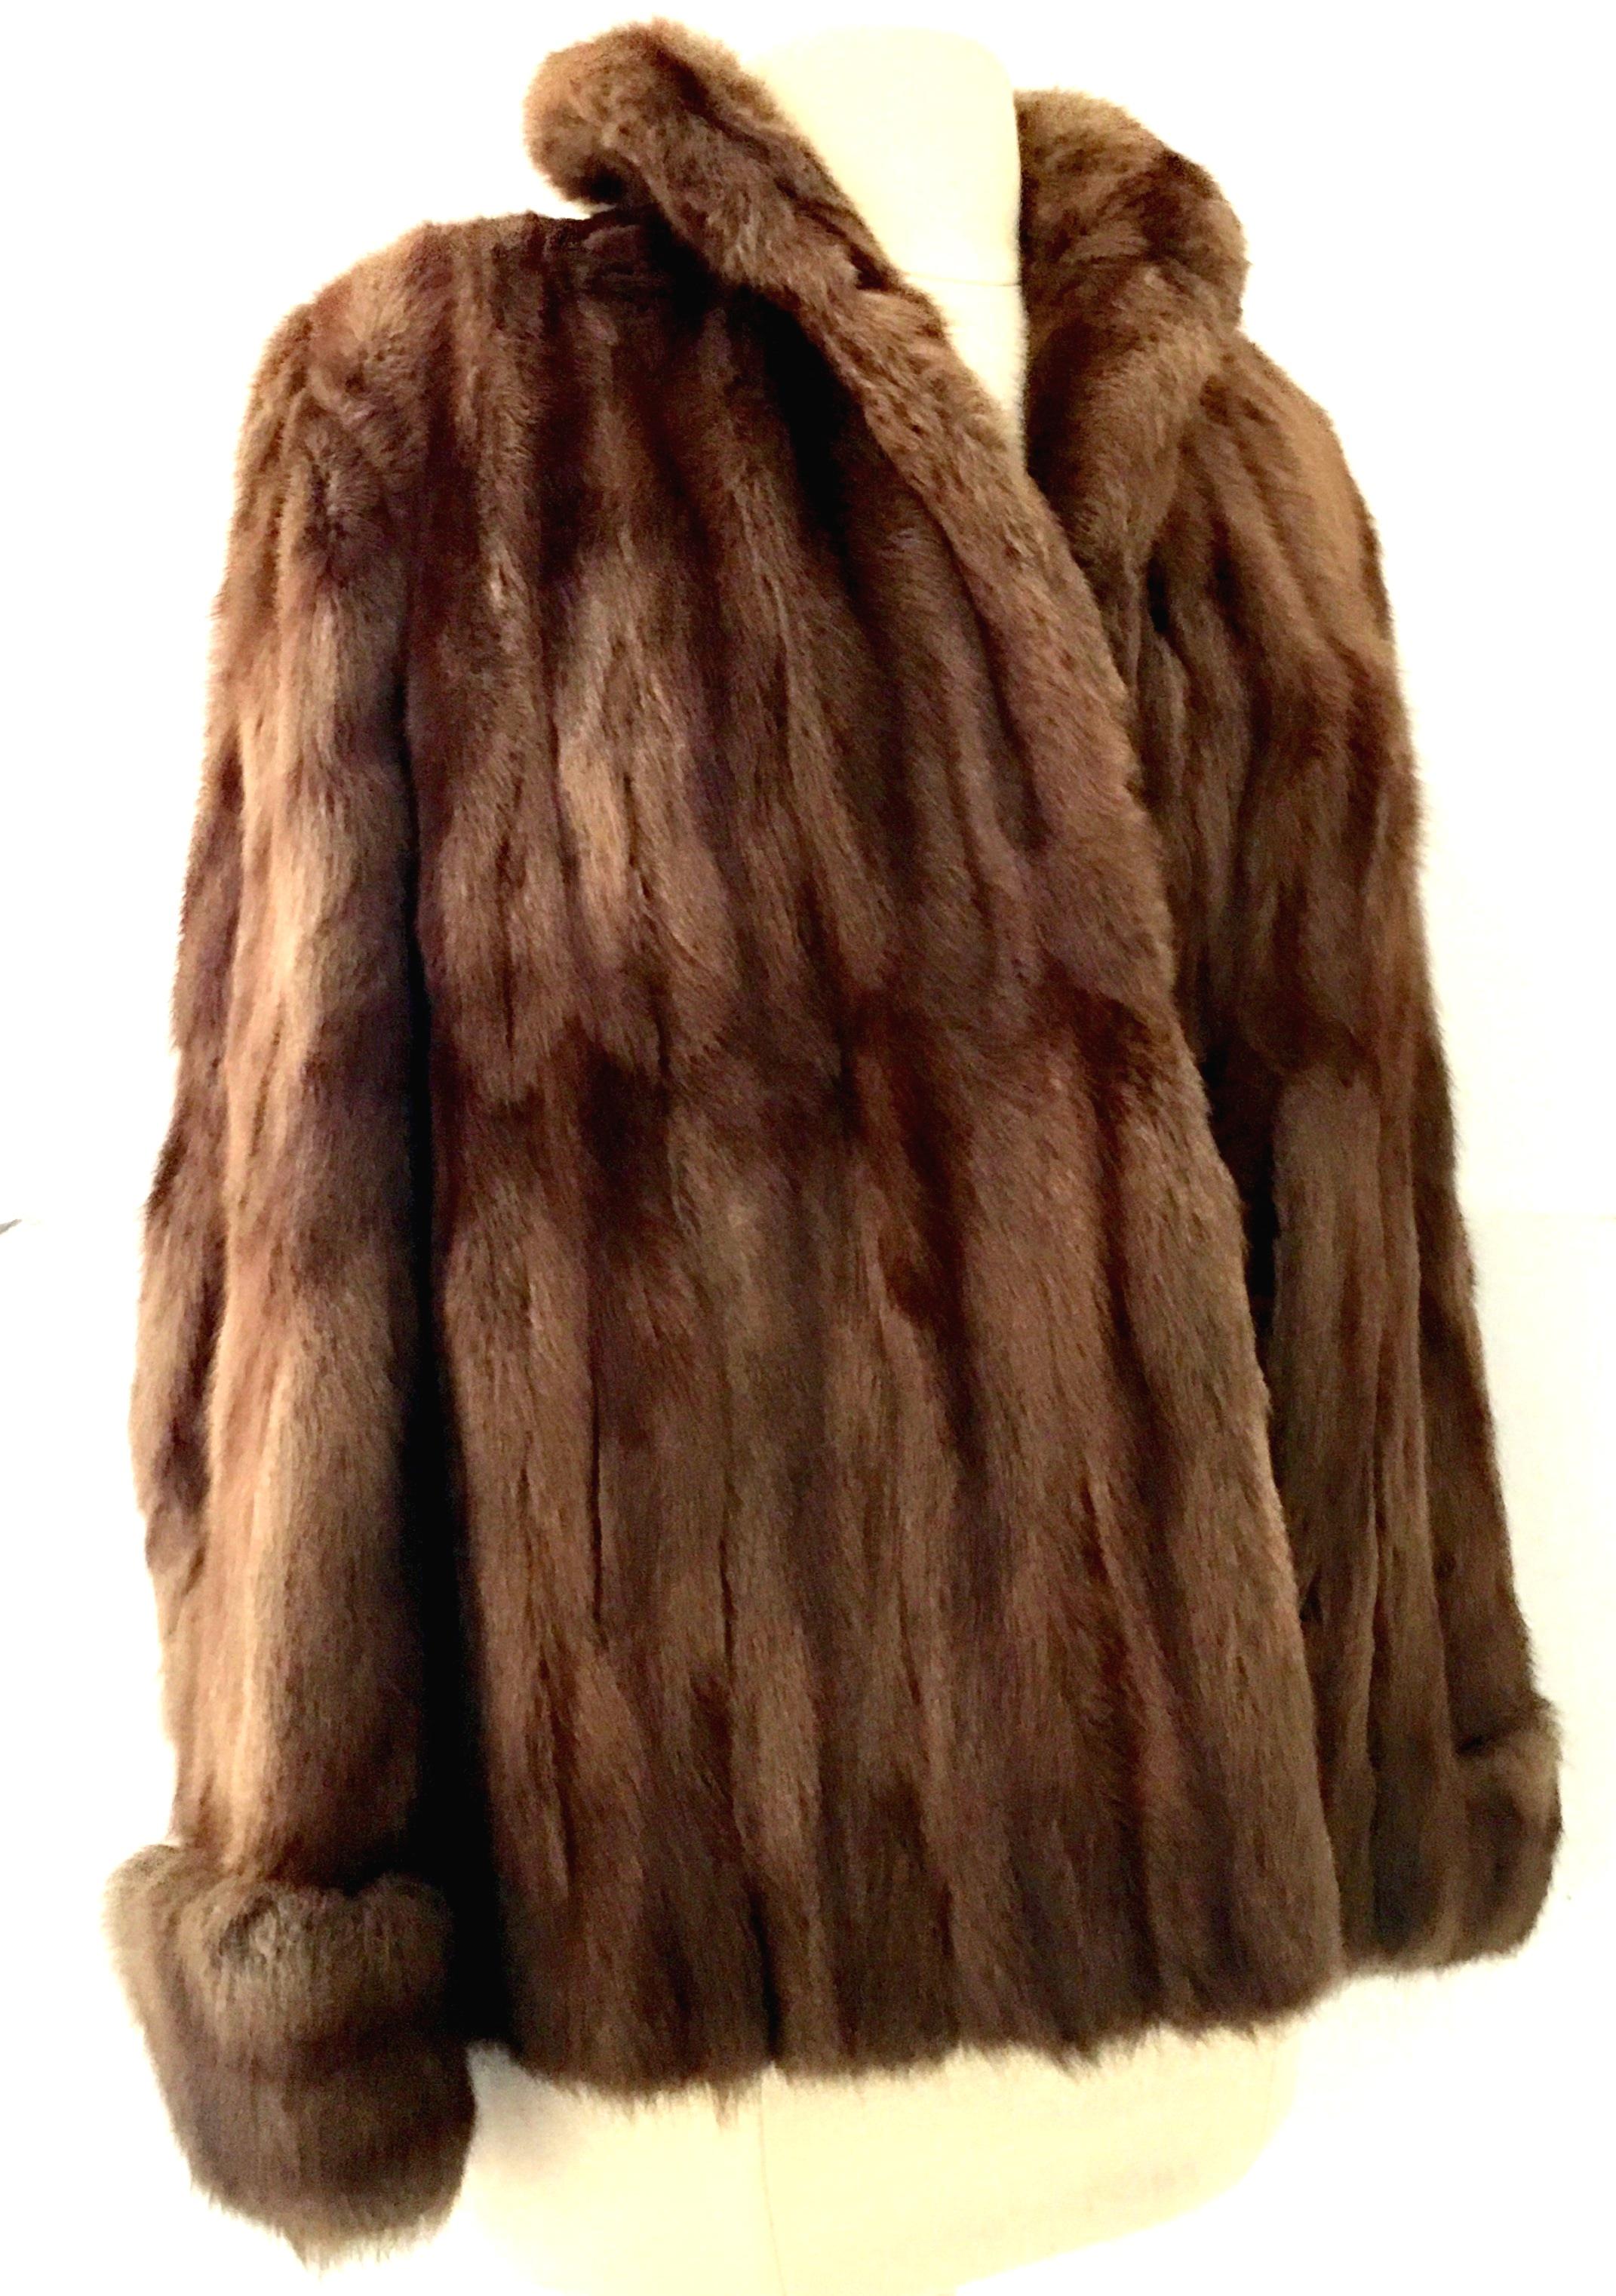 20th Century Gorgeous whiskey dyed Mink Fur jacket by, H.P. Wasson & Co. Indianapolis. Features a single breasted collar, two side pockets and cuff style sleeves. Fully lined with two front 